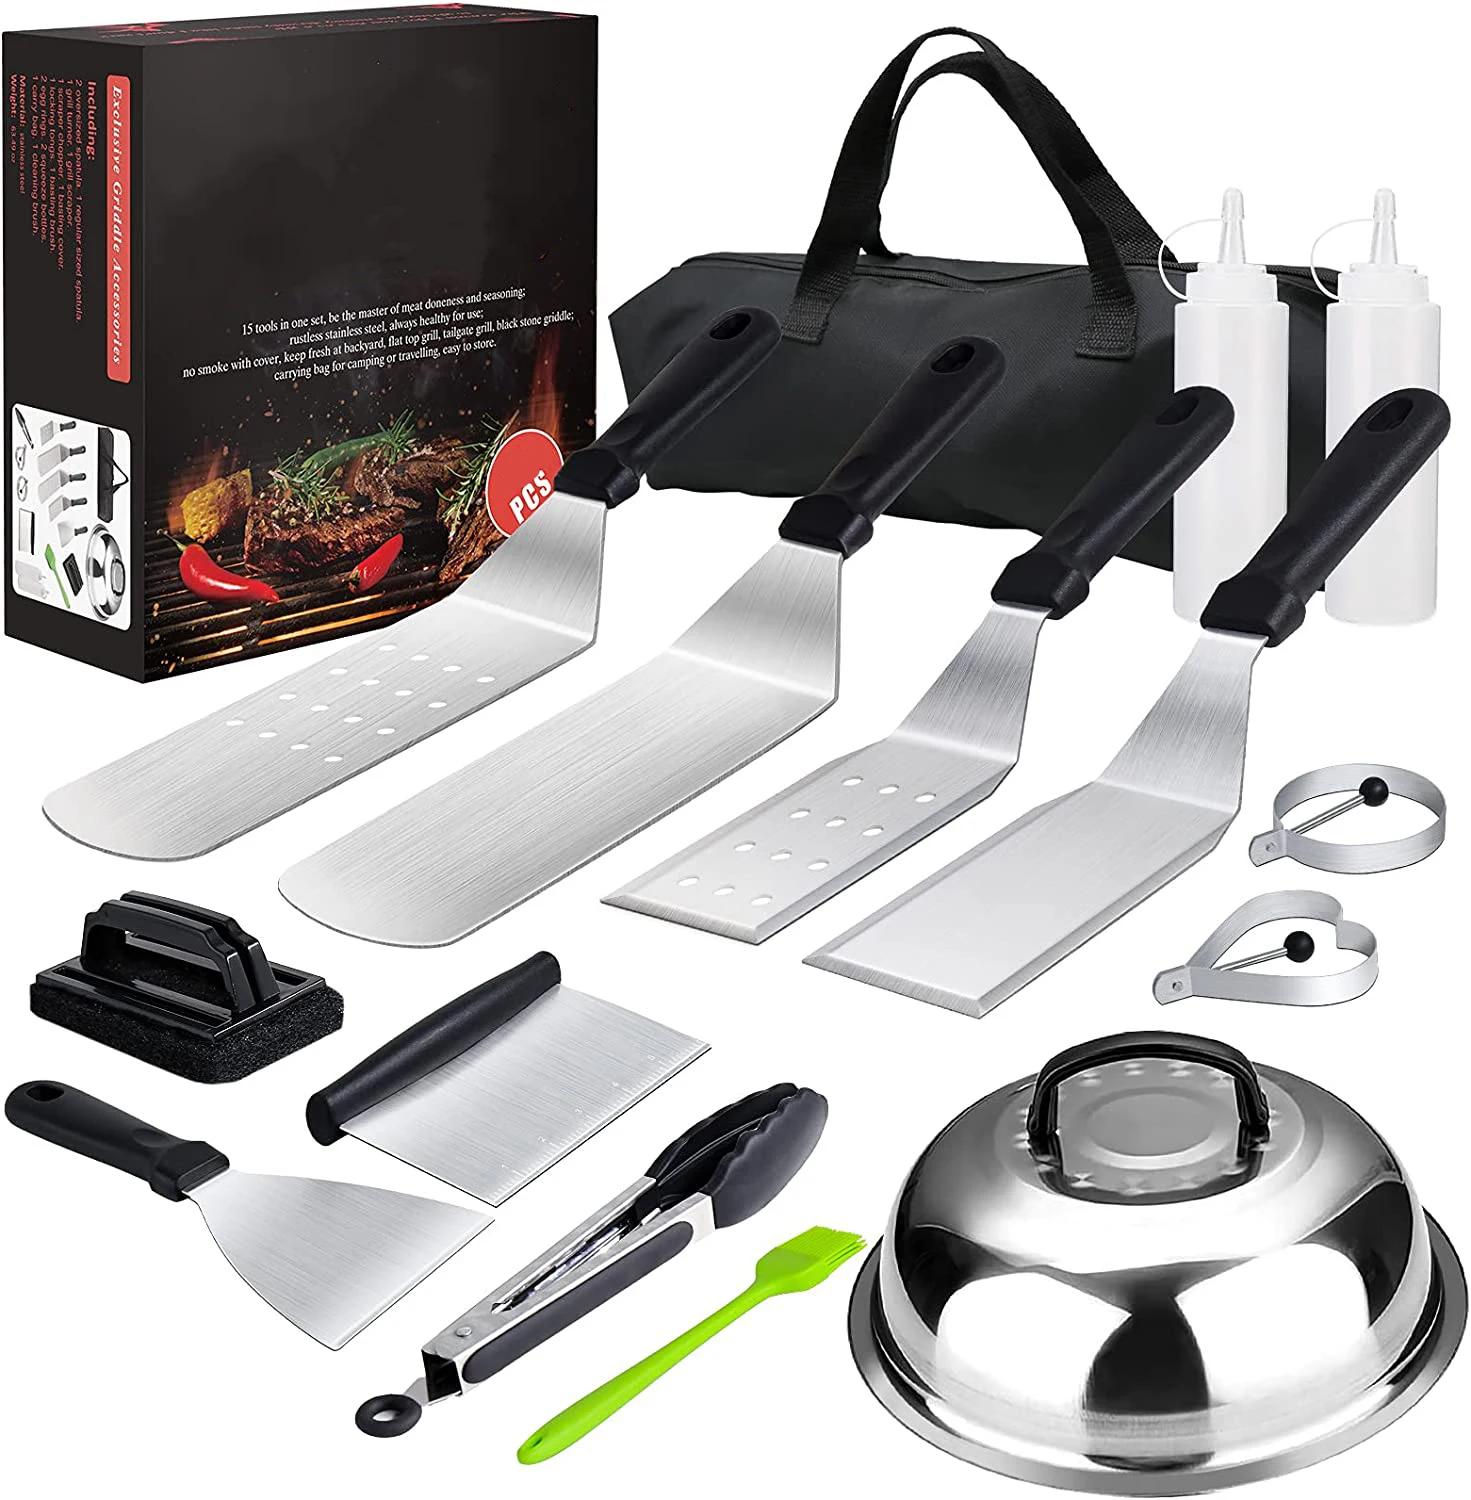 Flat Top Griddle Accessories Kit Outdoor Teppanyaki Bbq Cooking Camping 20Pcs Blackstone Griddle Accessories Set Carry Bag